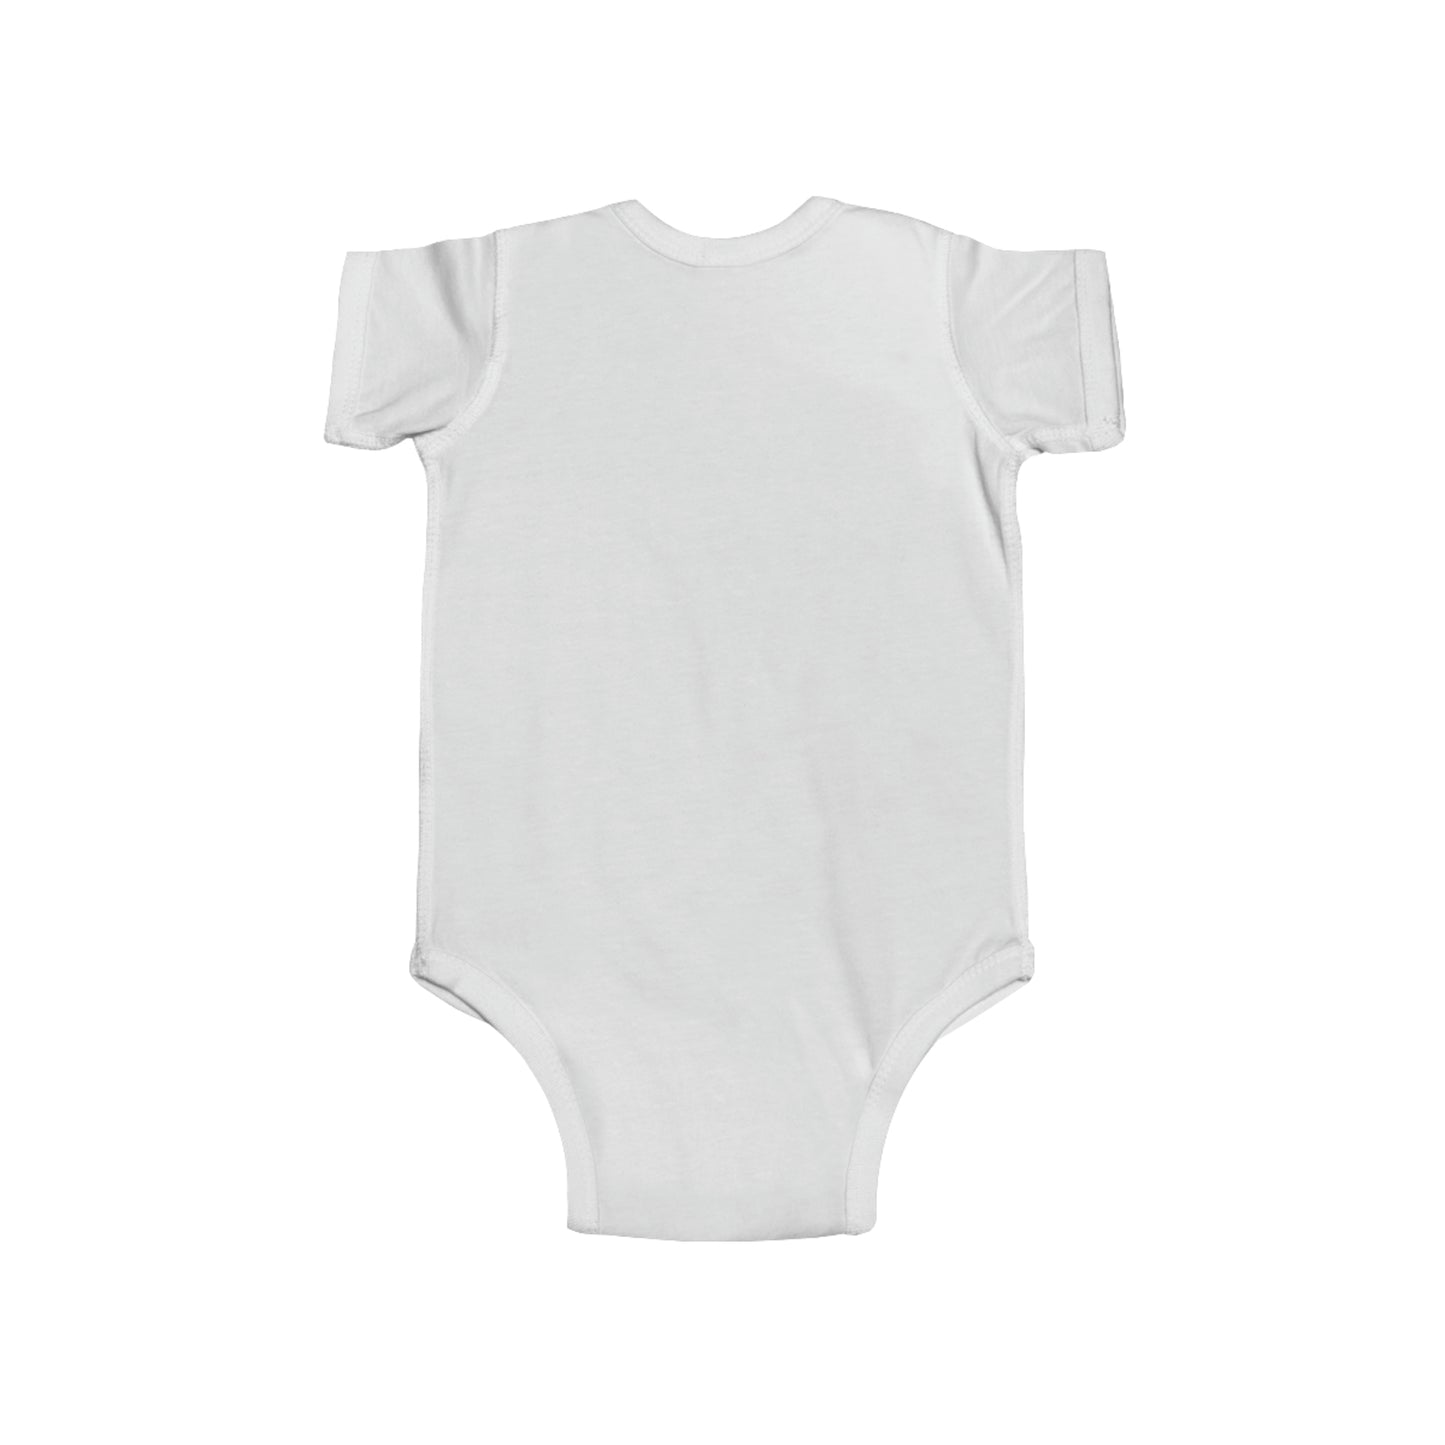 "Baby It's Cold Outside" Infant Fine Jersey Bodysuit, Soft and Durable, Plastic Snaps at the Cross Closure for Easy Changing Access